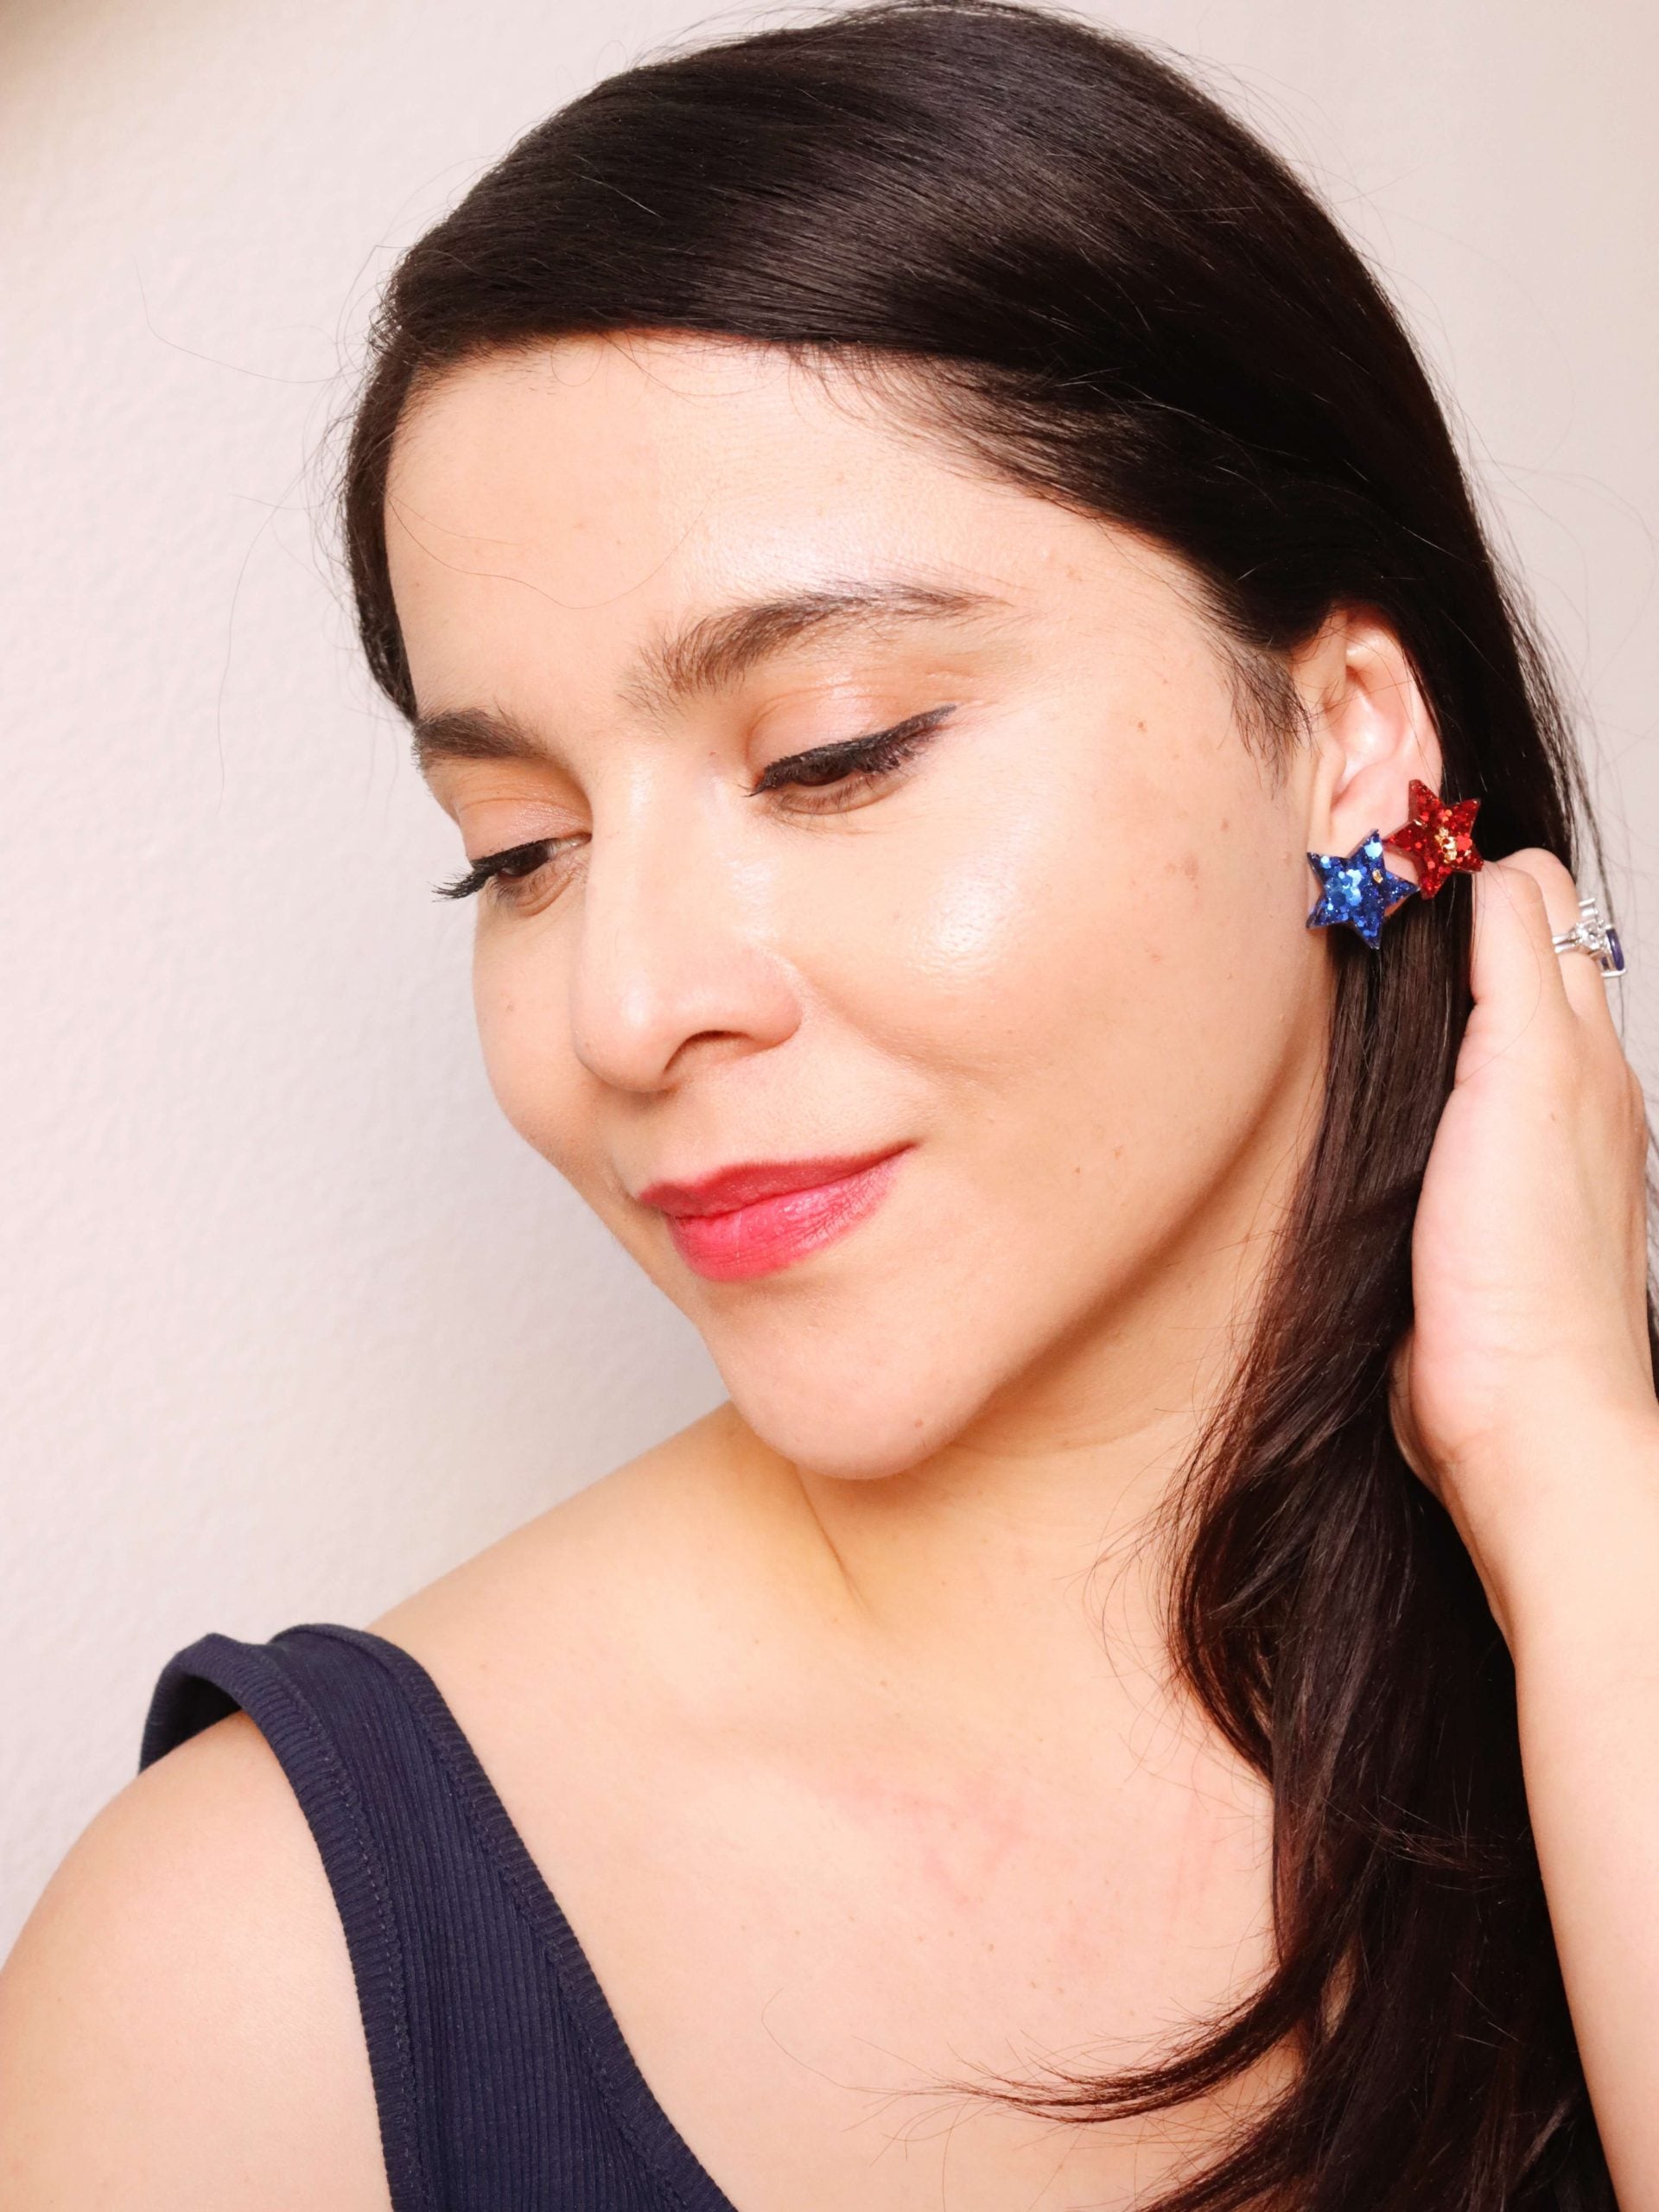 patriotic-star-stud-earrings---patriotic-star-stud-earrings---red-white-and-blue-jewelry---kaleidoscopes-and-polka-dots